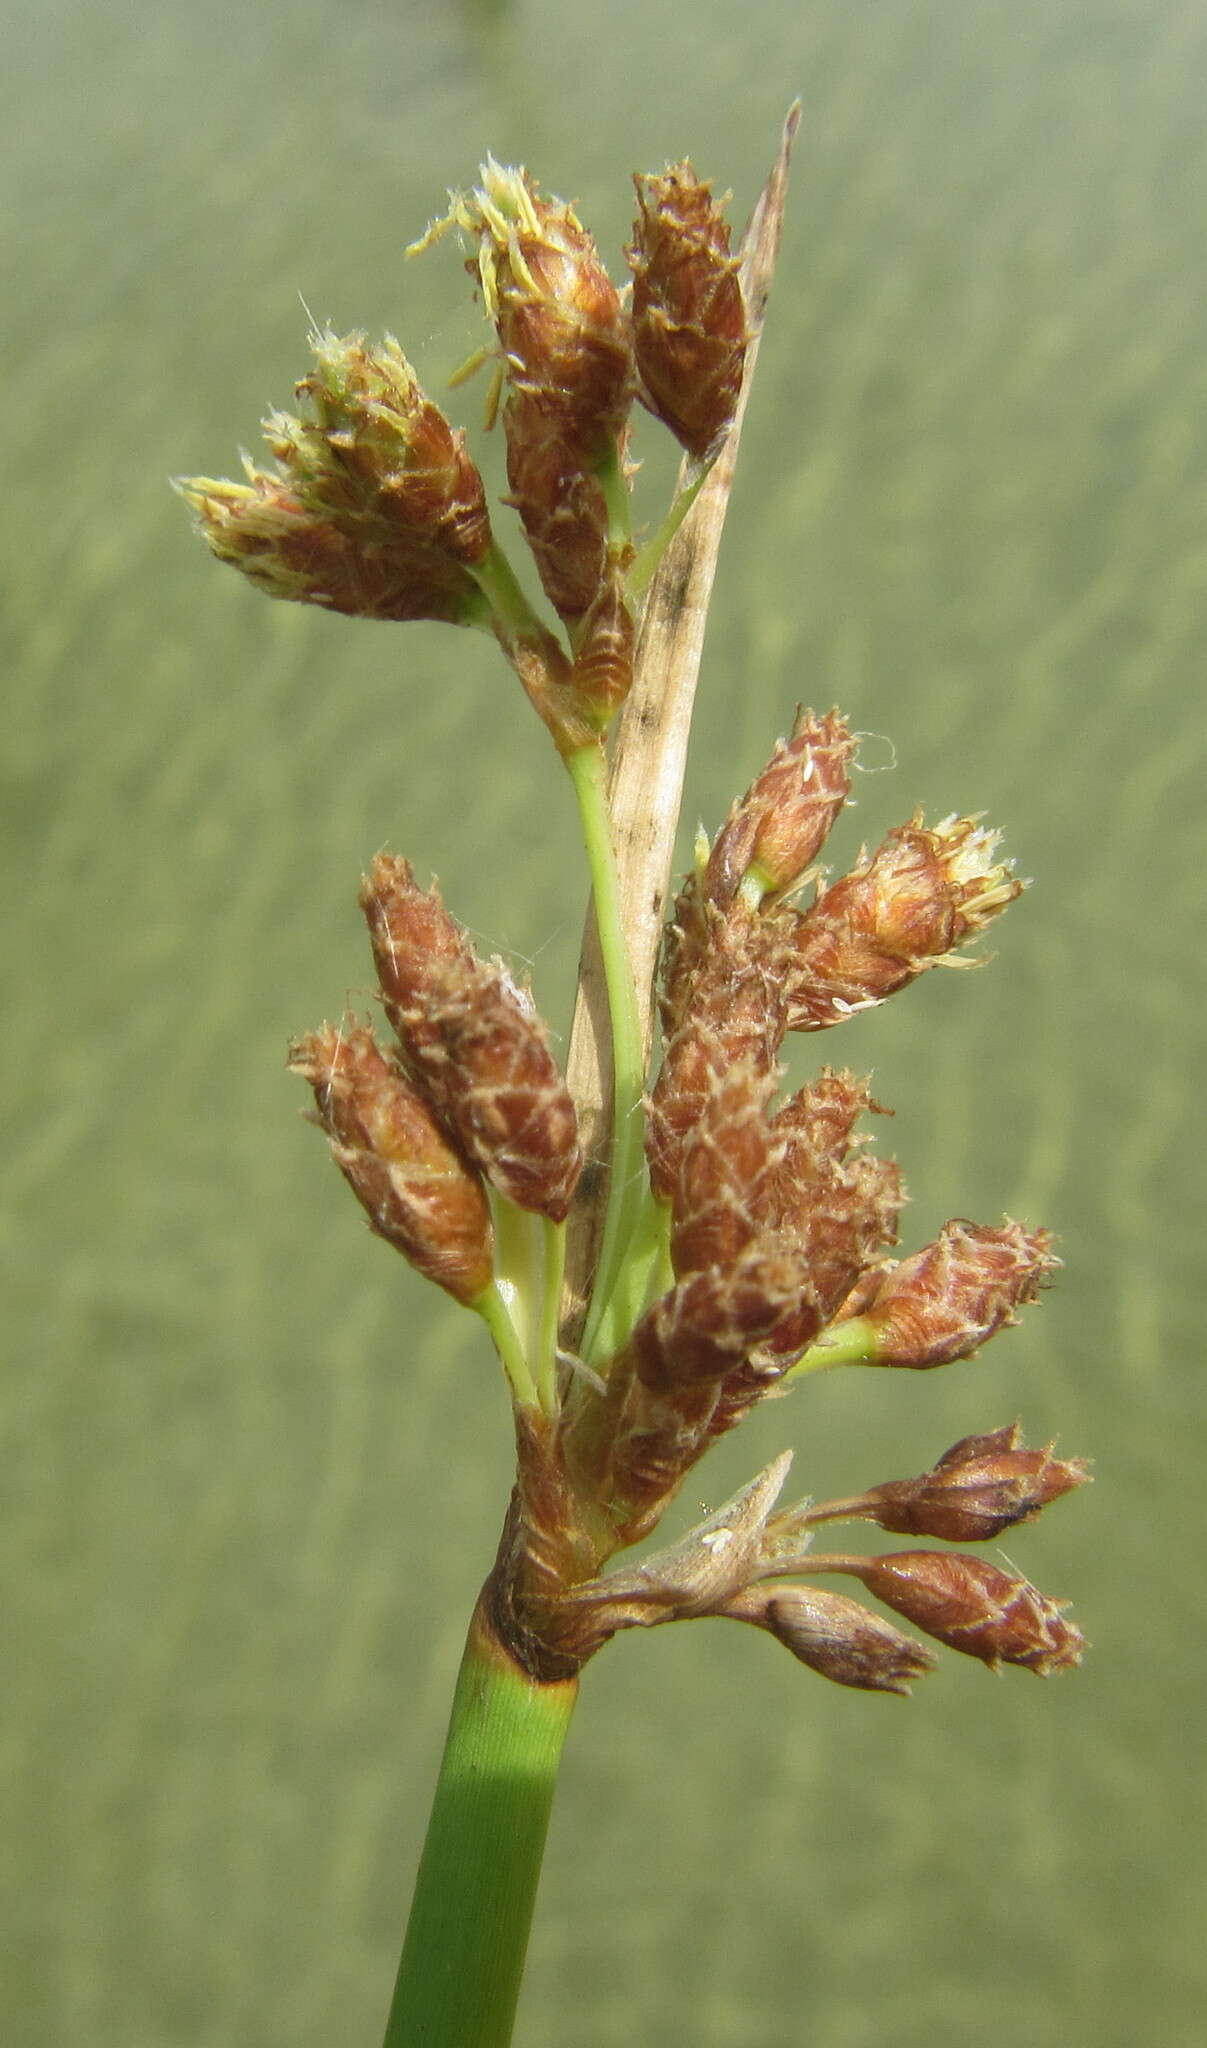 Image of Schoenoplectus scirpoides (Schrad.) Browning